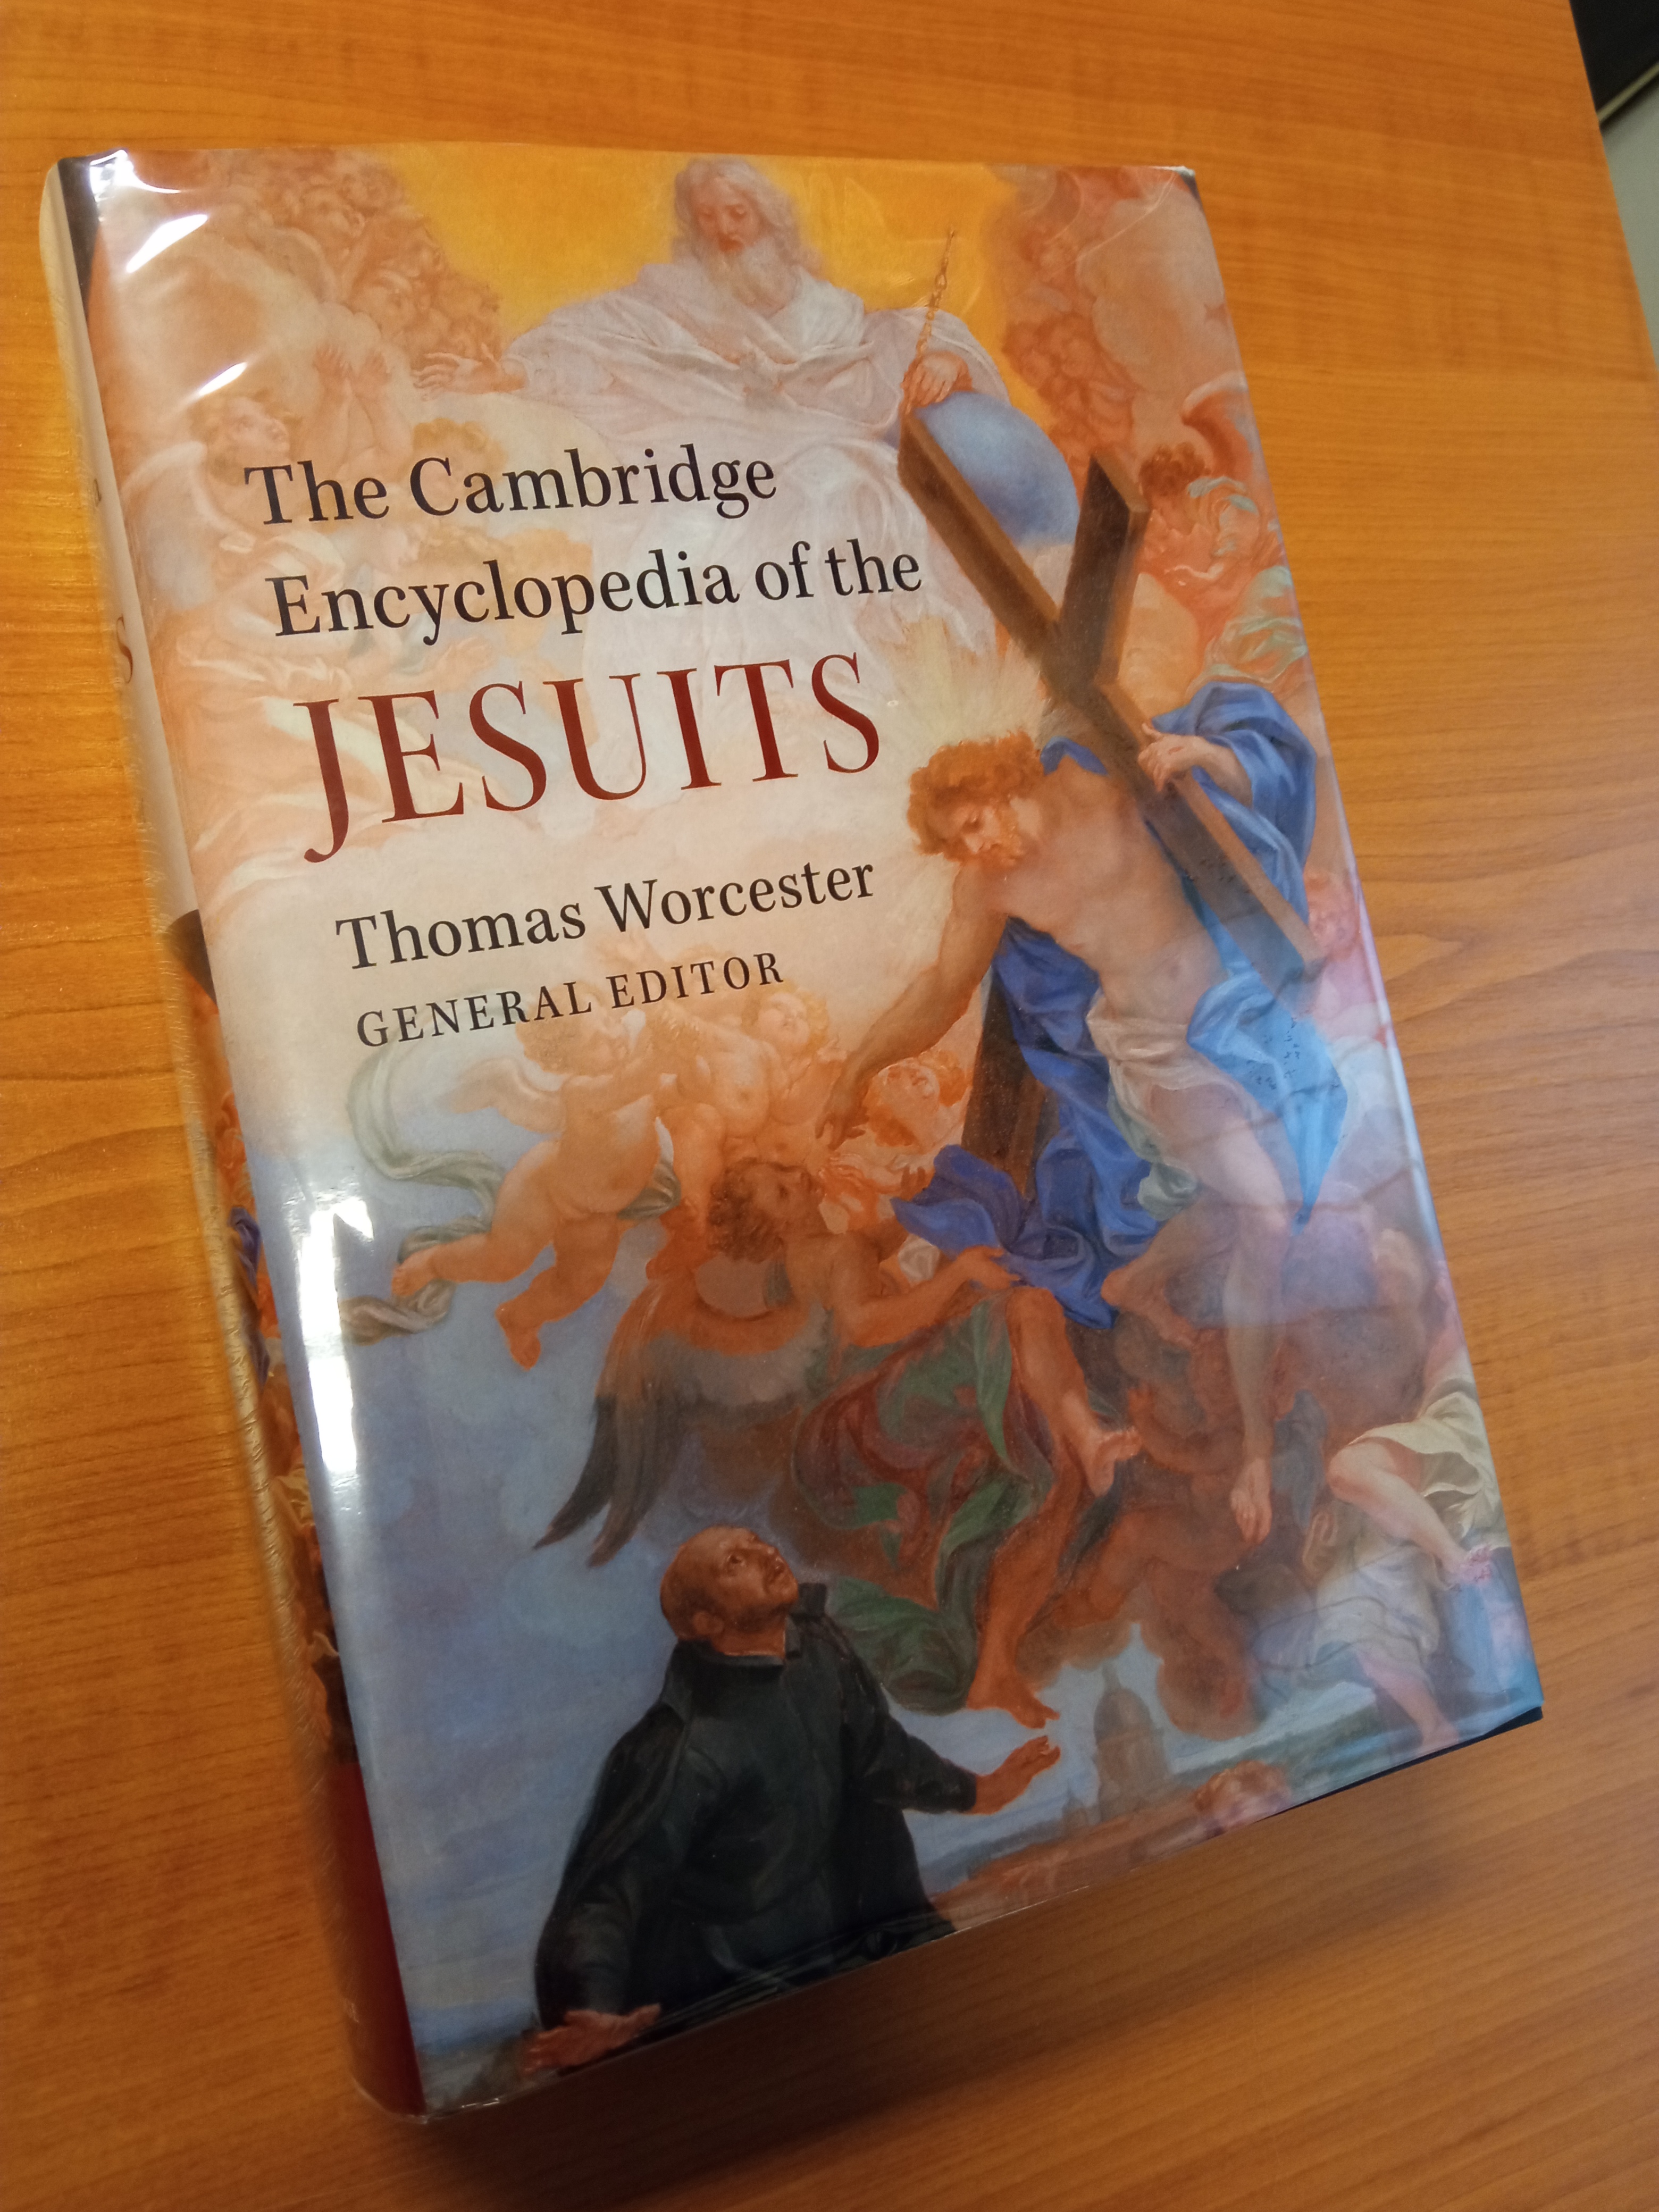 The Cambridge Encyclopedia of the Jesuits. Edited by Thomas Worcester SJ. College of the Holy Cross, Massachusetts, 2017.